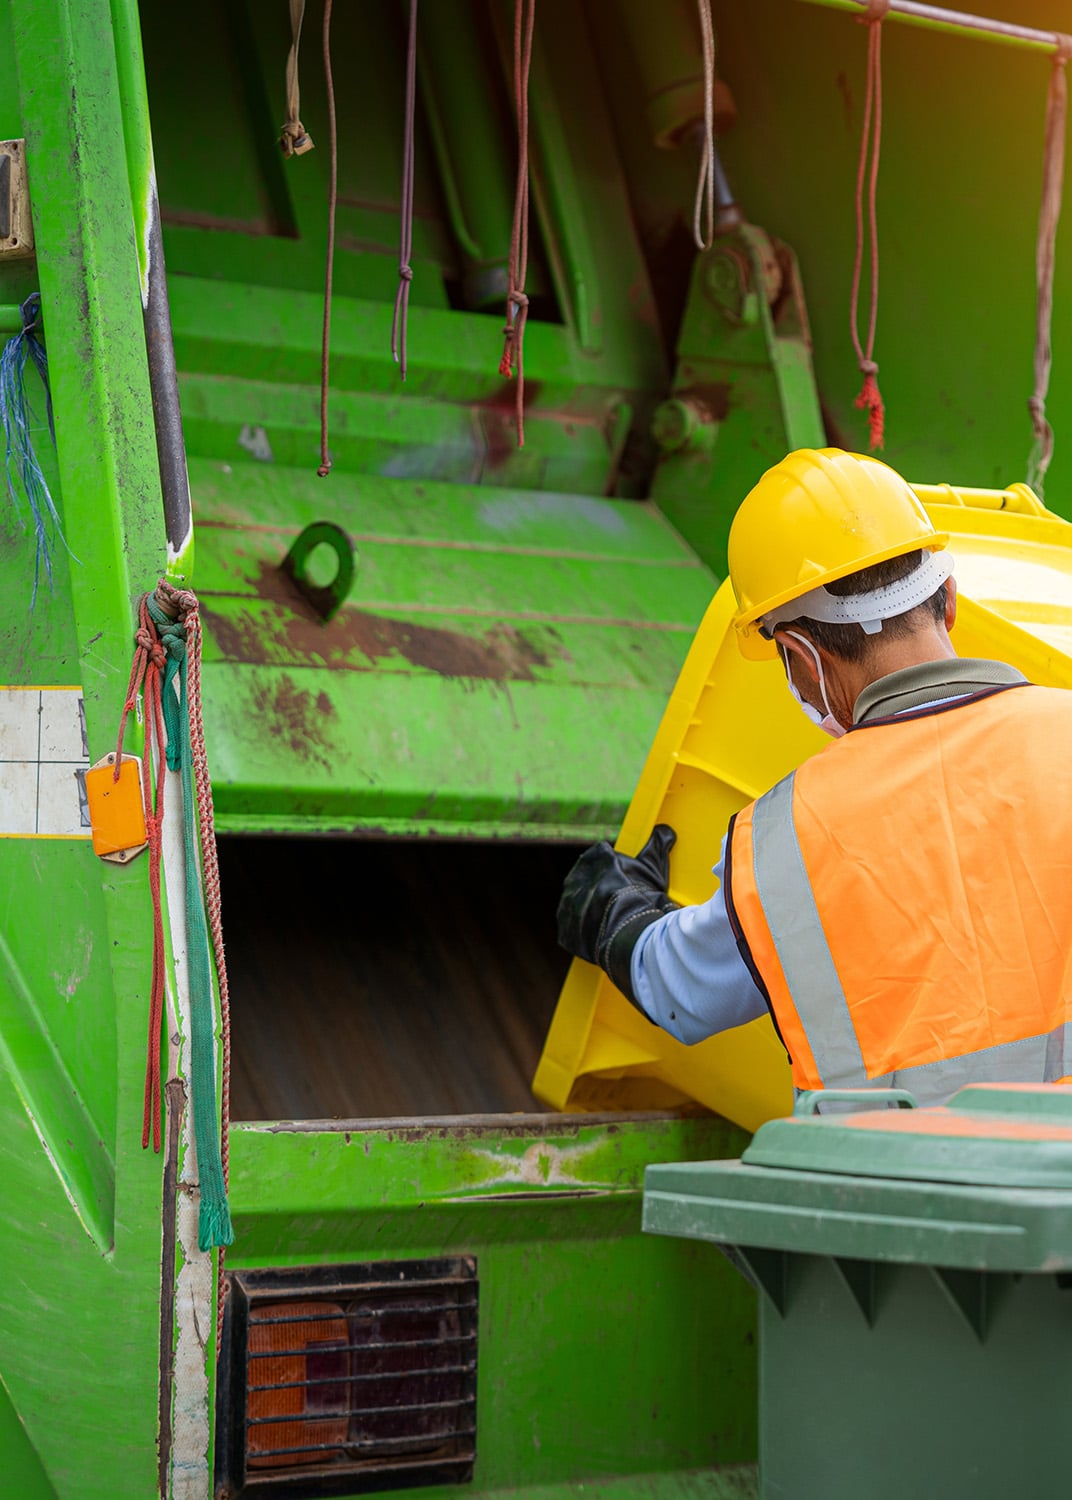 Image of rubbish truck with workers tipping bin inside